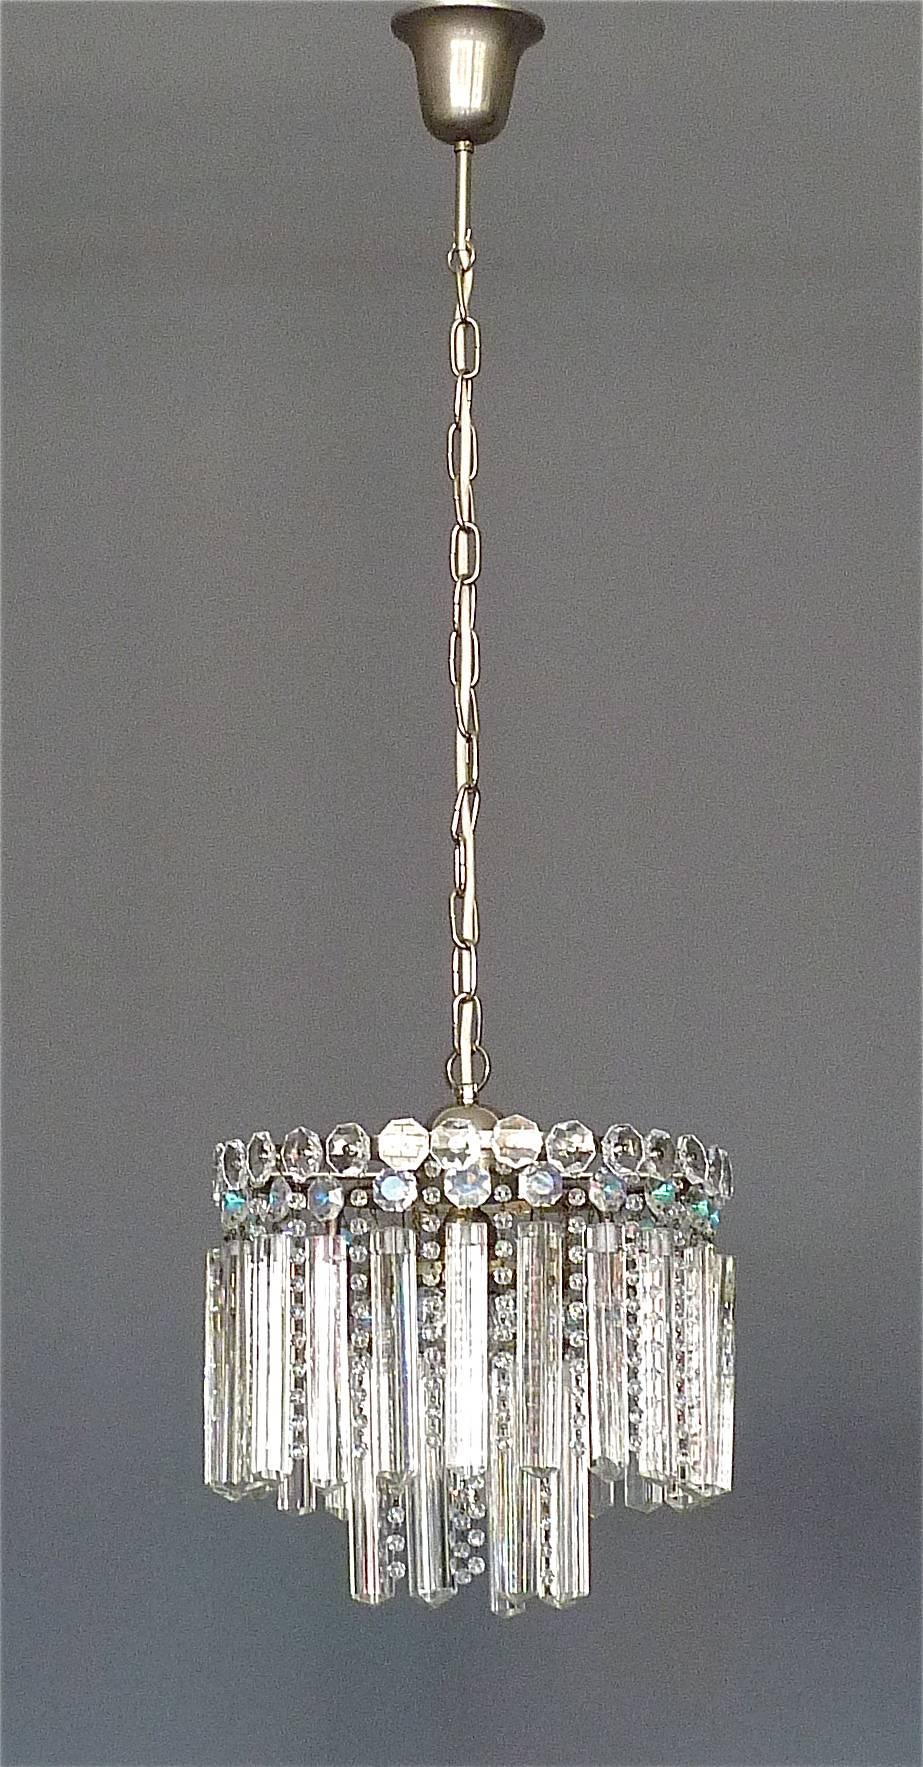 Precious faceted crystal glass chandelier made by Lobmeyr or Bakalowits, Vienna, Austria, circa 1950s. The chain-hanging length-adjustable two-tier chandelier has three-sided elongated hand-cut crystal glass sticks and lots of high lead hand-cut